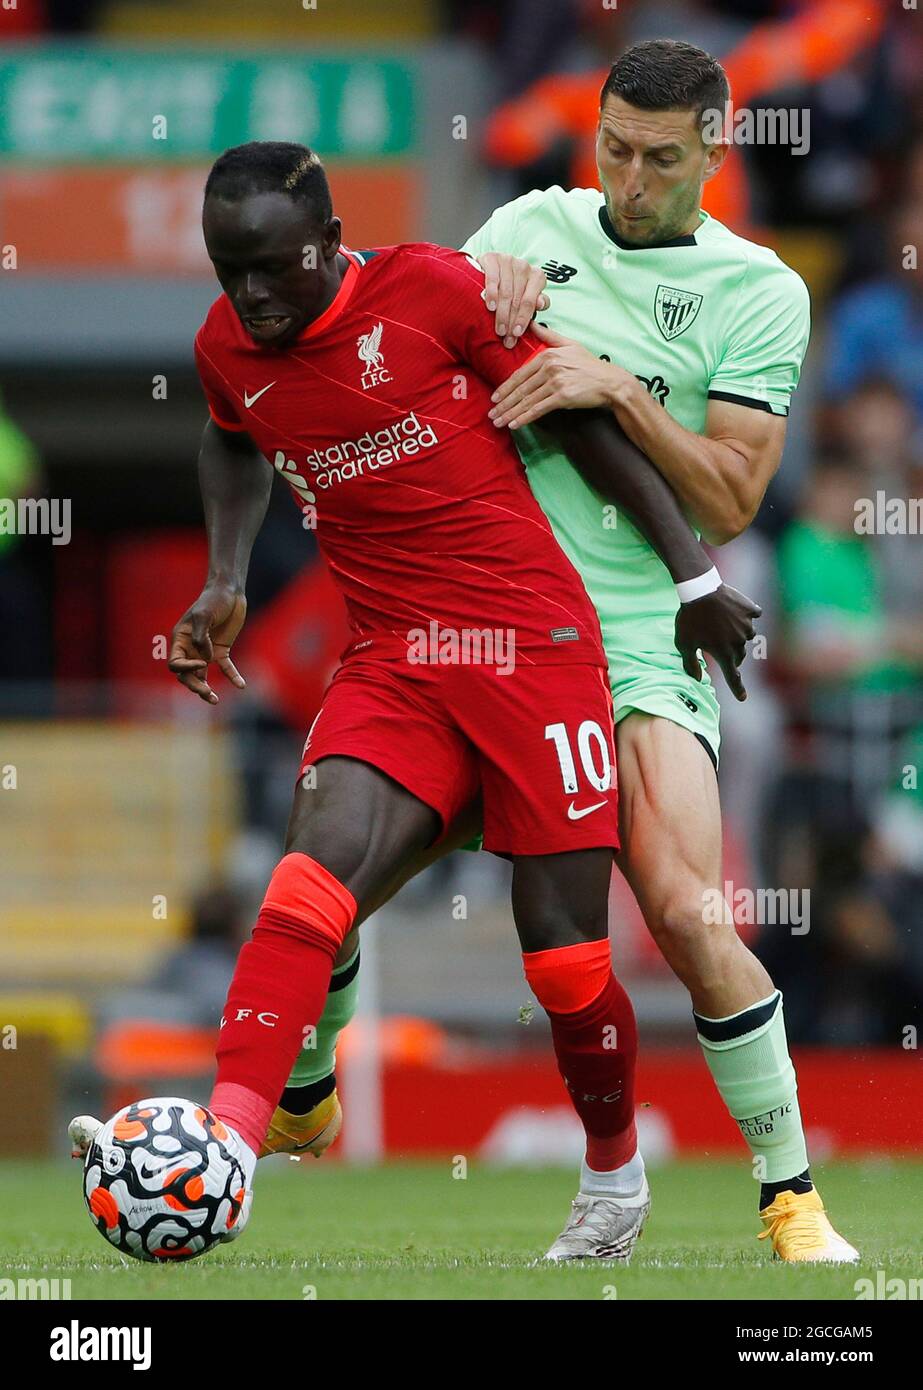 Liverpool, UK. 8th Aug, 2021. Oscar De Marcos of Athletic Bilbao challenges  Sadio Mane of Liverpool during the Pre Season Friendly match at Anfield,  Liverpool. Picture credit should read: Darren Staples/Sportimage Credit: